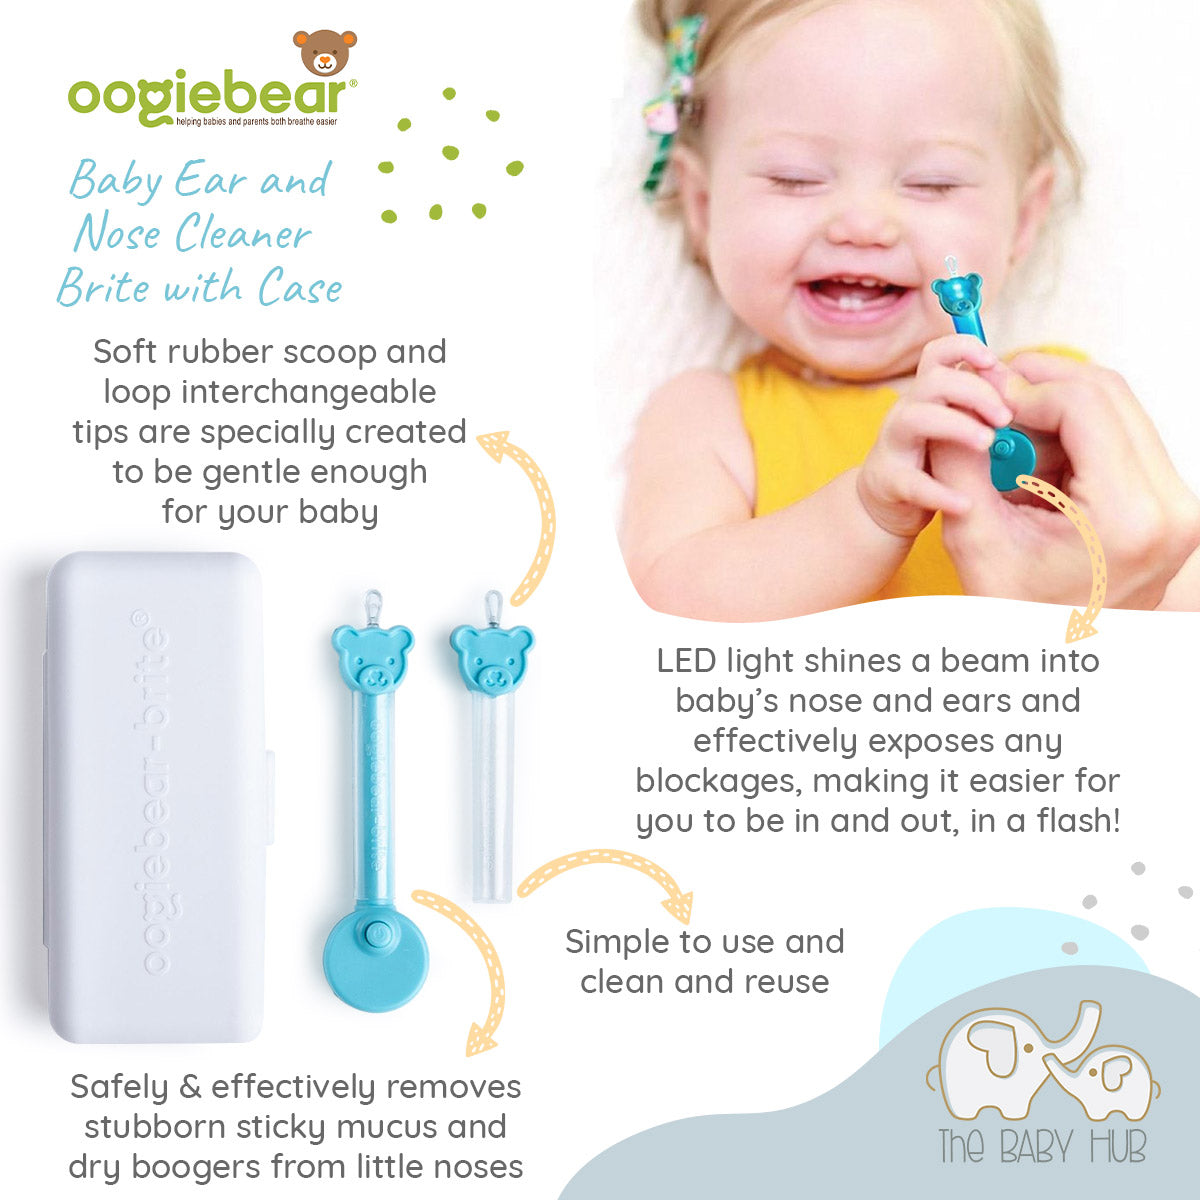 Oogiebear - Brite the Safe Baby Nasal Booger & Ear Cleaner - New